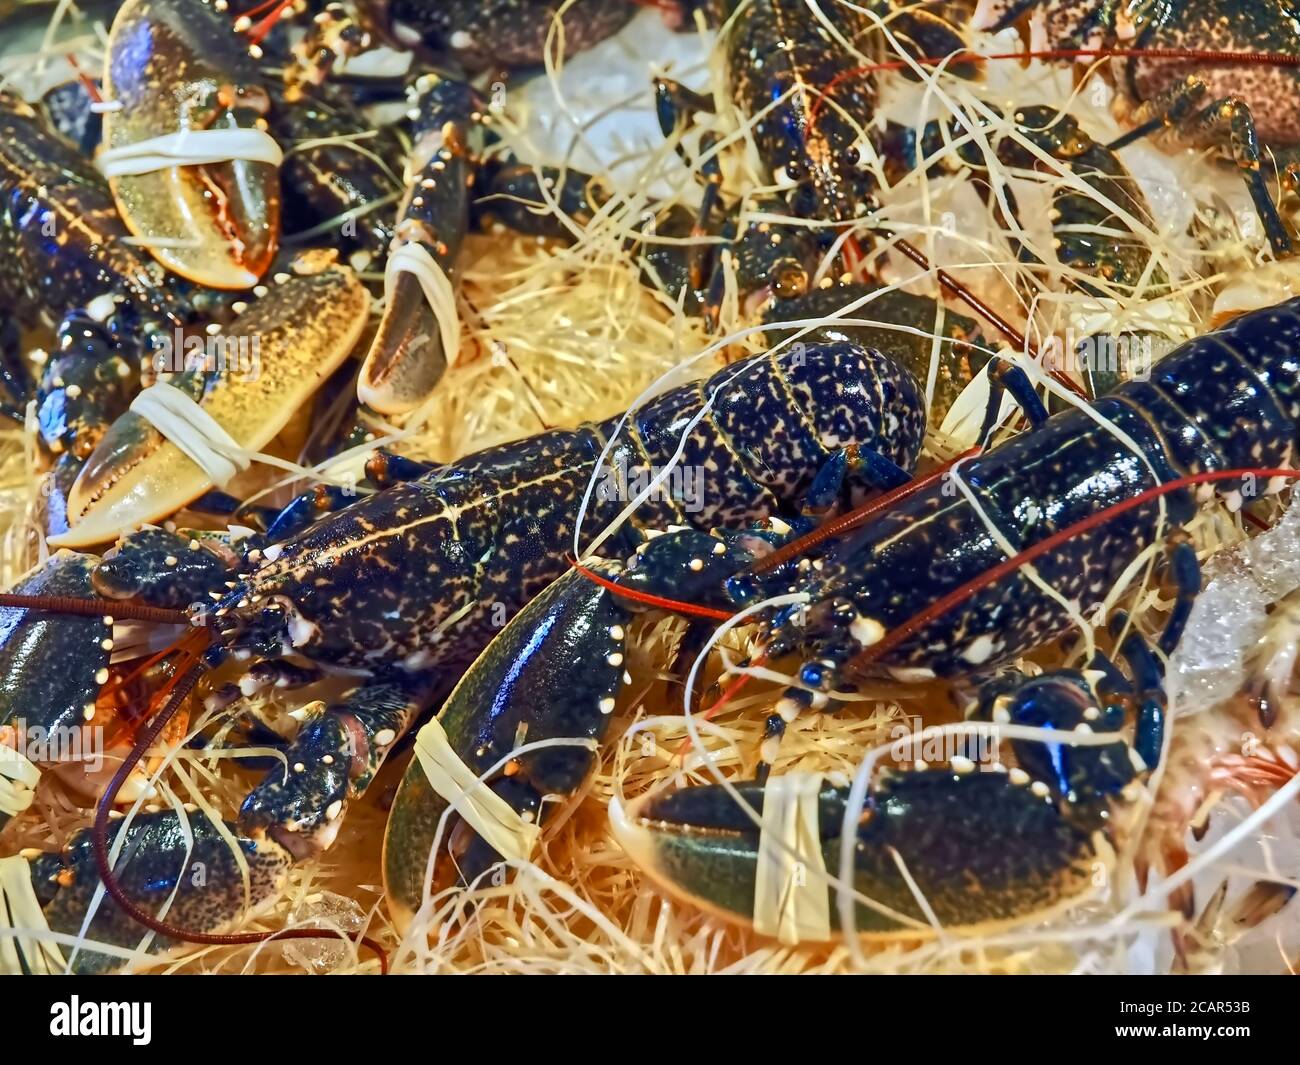 Living black lobster at a food market Stock Photo